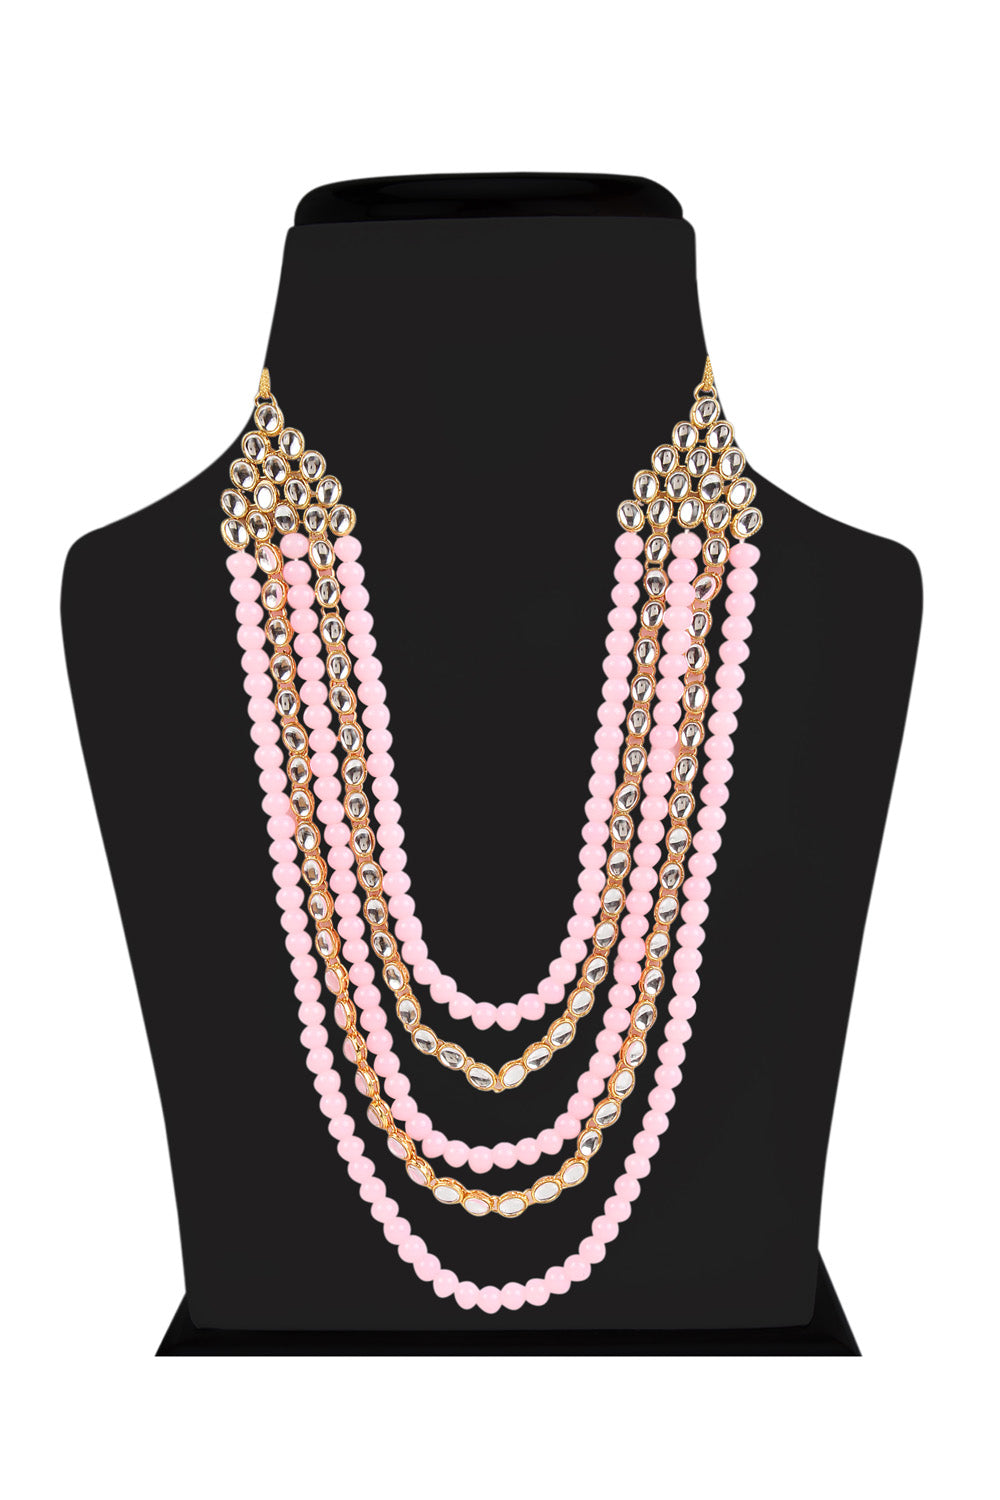 Alloy Necklace with Earrings in pink